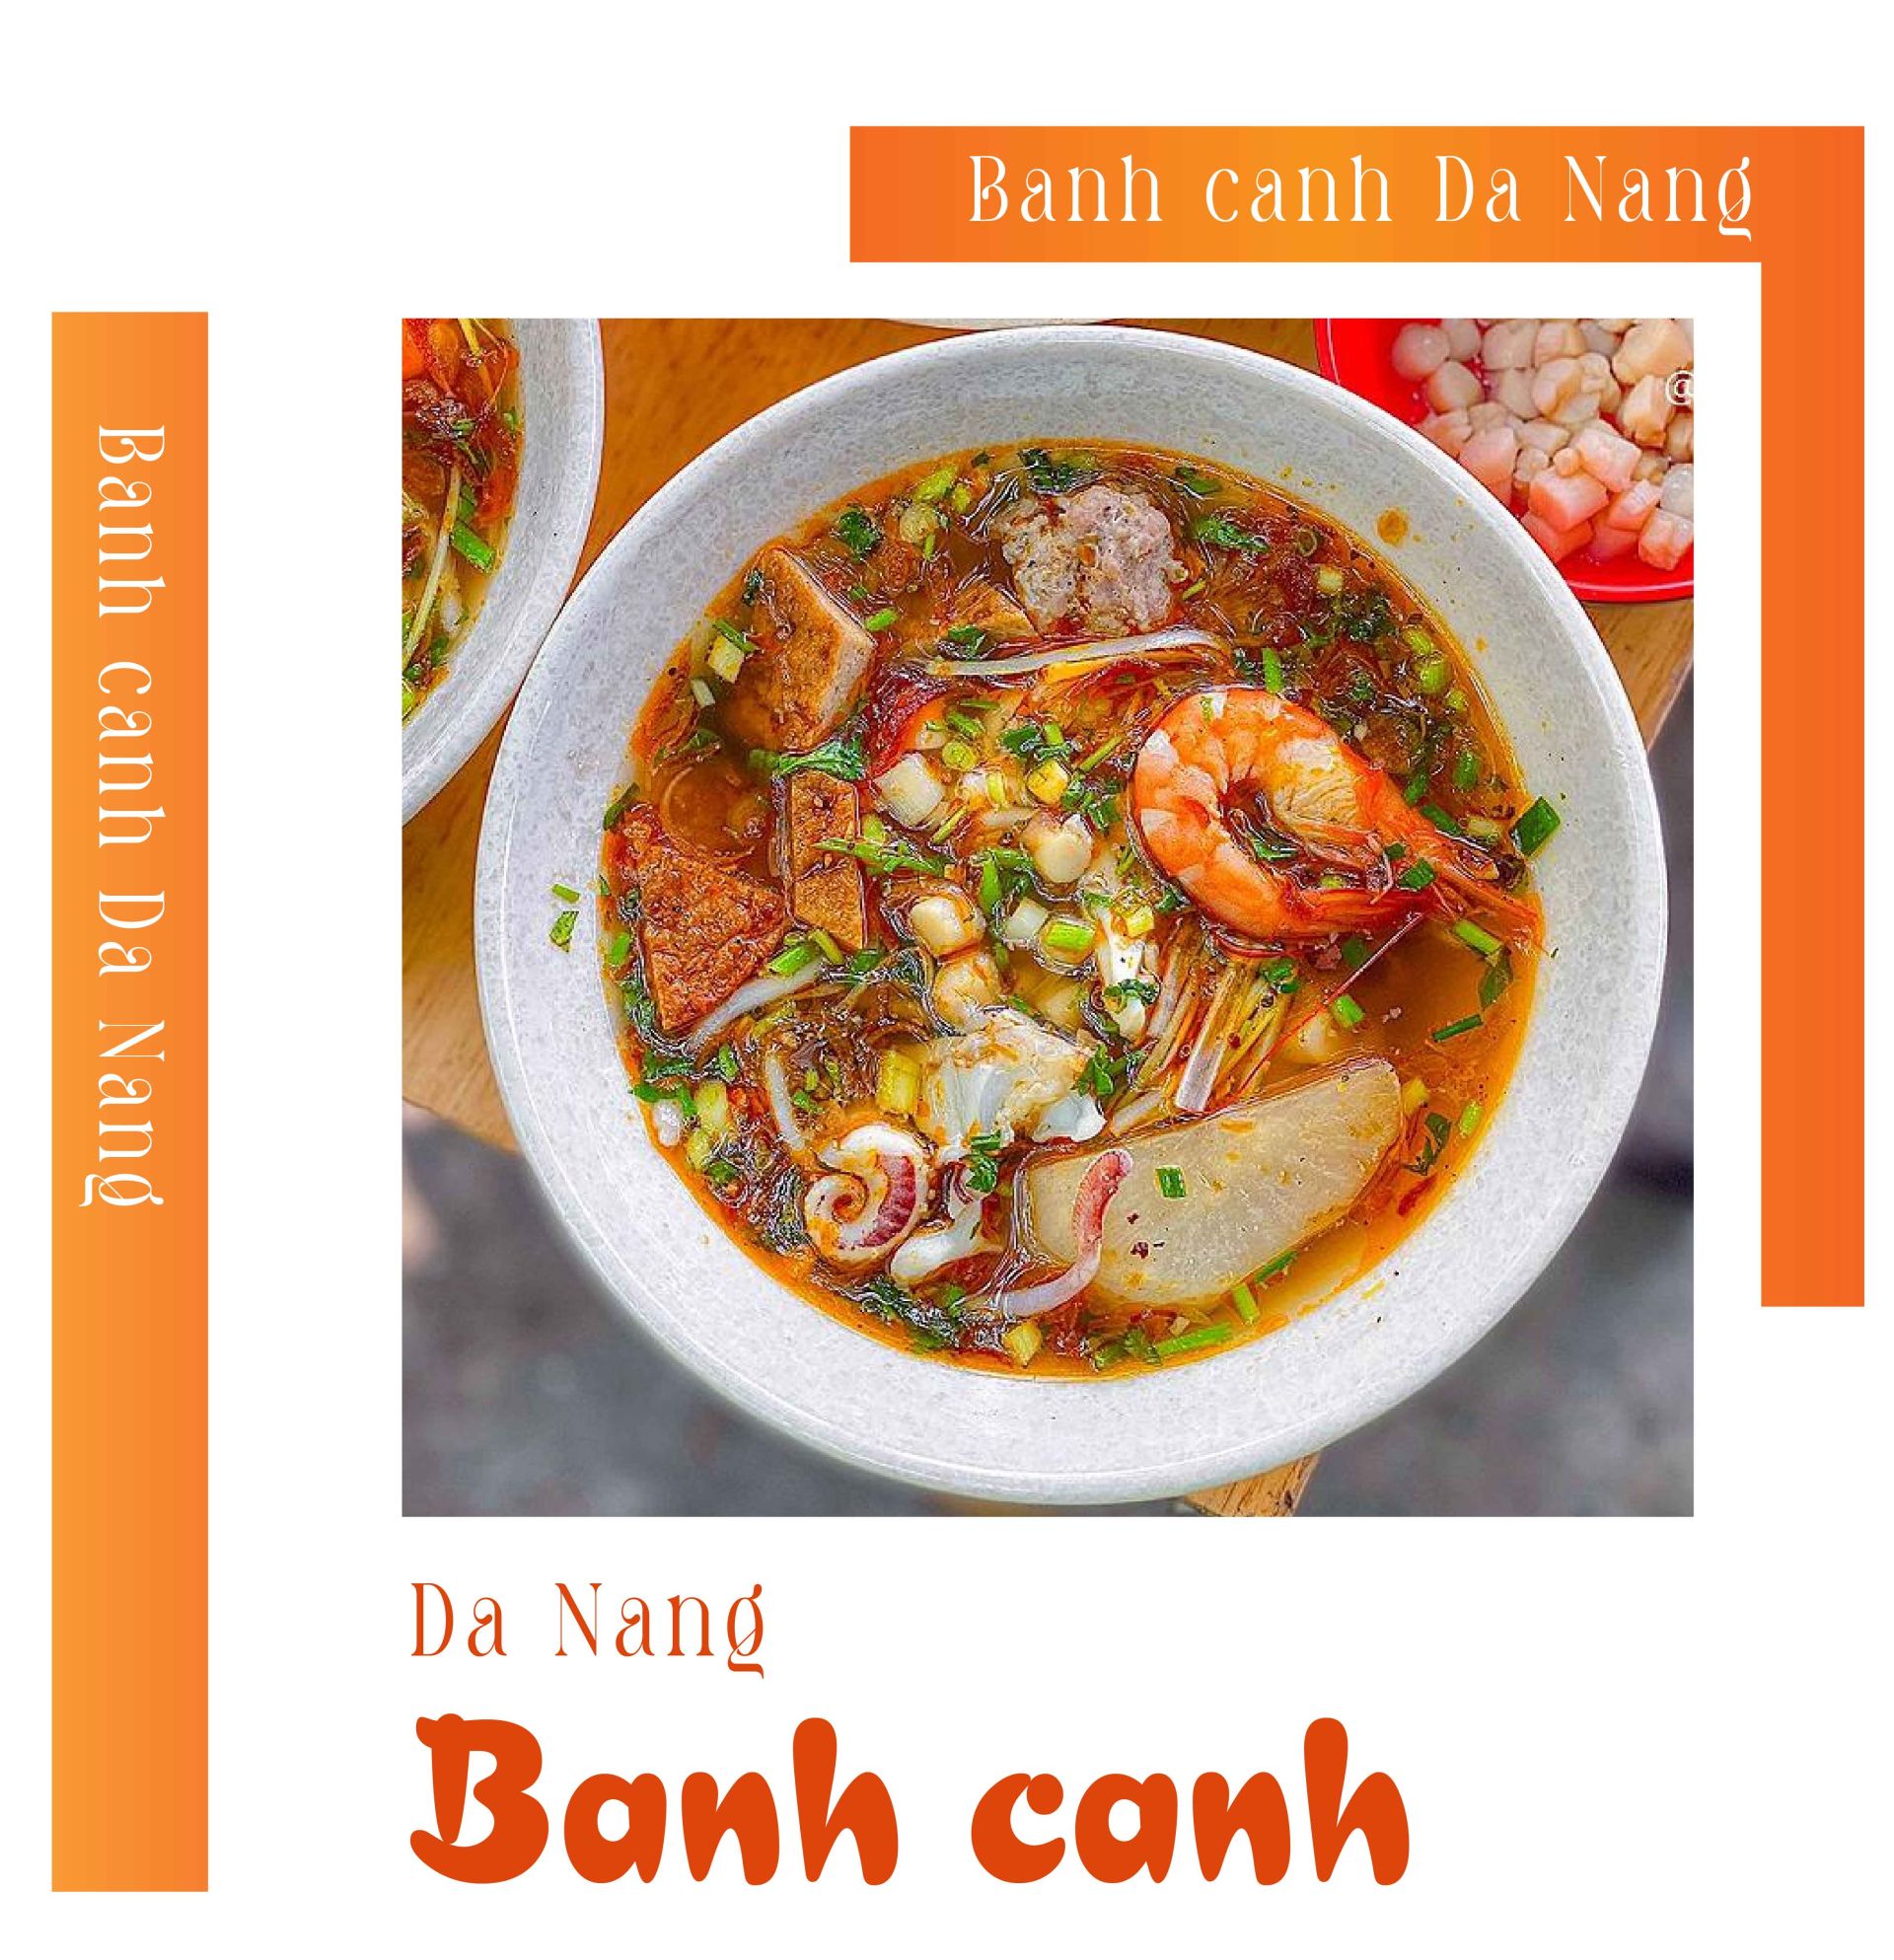 Banh Canh is another delectable meal in Da Nang that visitors should try. Banh Canh
is produced from a variety of components, including cassava, wheat, and rice. Da
Nang cake soup with superb chewy noodles and broth made from pig, crab, and fish is
incredibly tasty and sweet.

When the weather is a little cool, make sure that guests may have a bowl of aromatic
cake soup with fried chewy bread; it is extremely wonderful. This meal is famous
among travelers since it is not only excellent but also inexpensive. Visitors to Da Nang
may discover tasty banh chung establishments to enjoy.